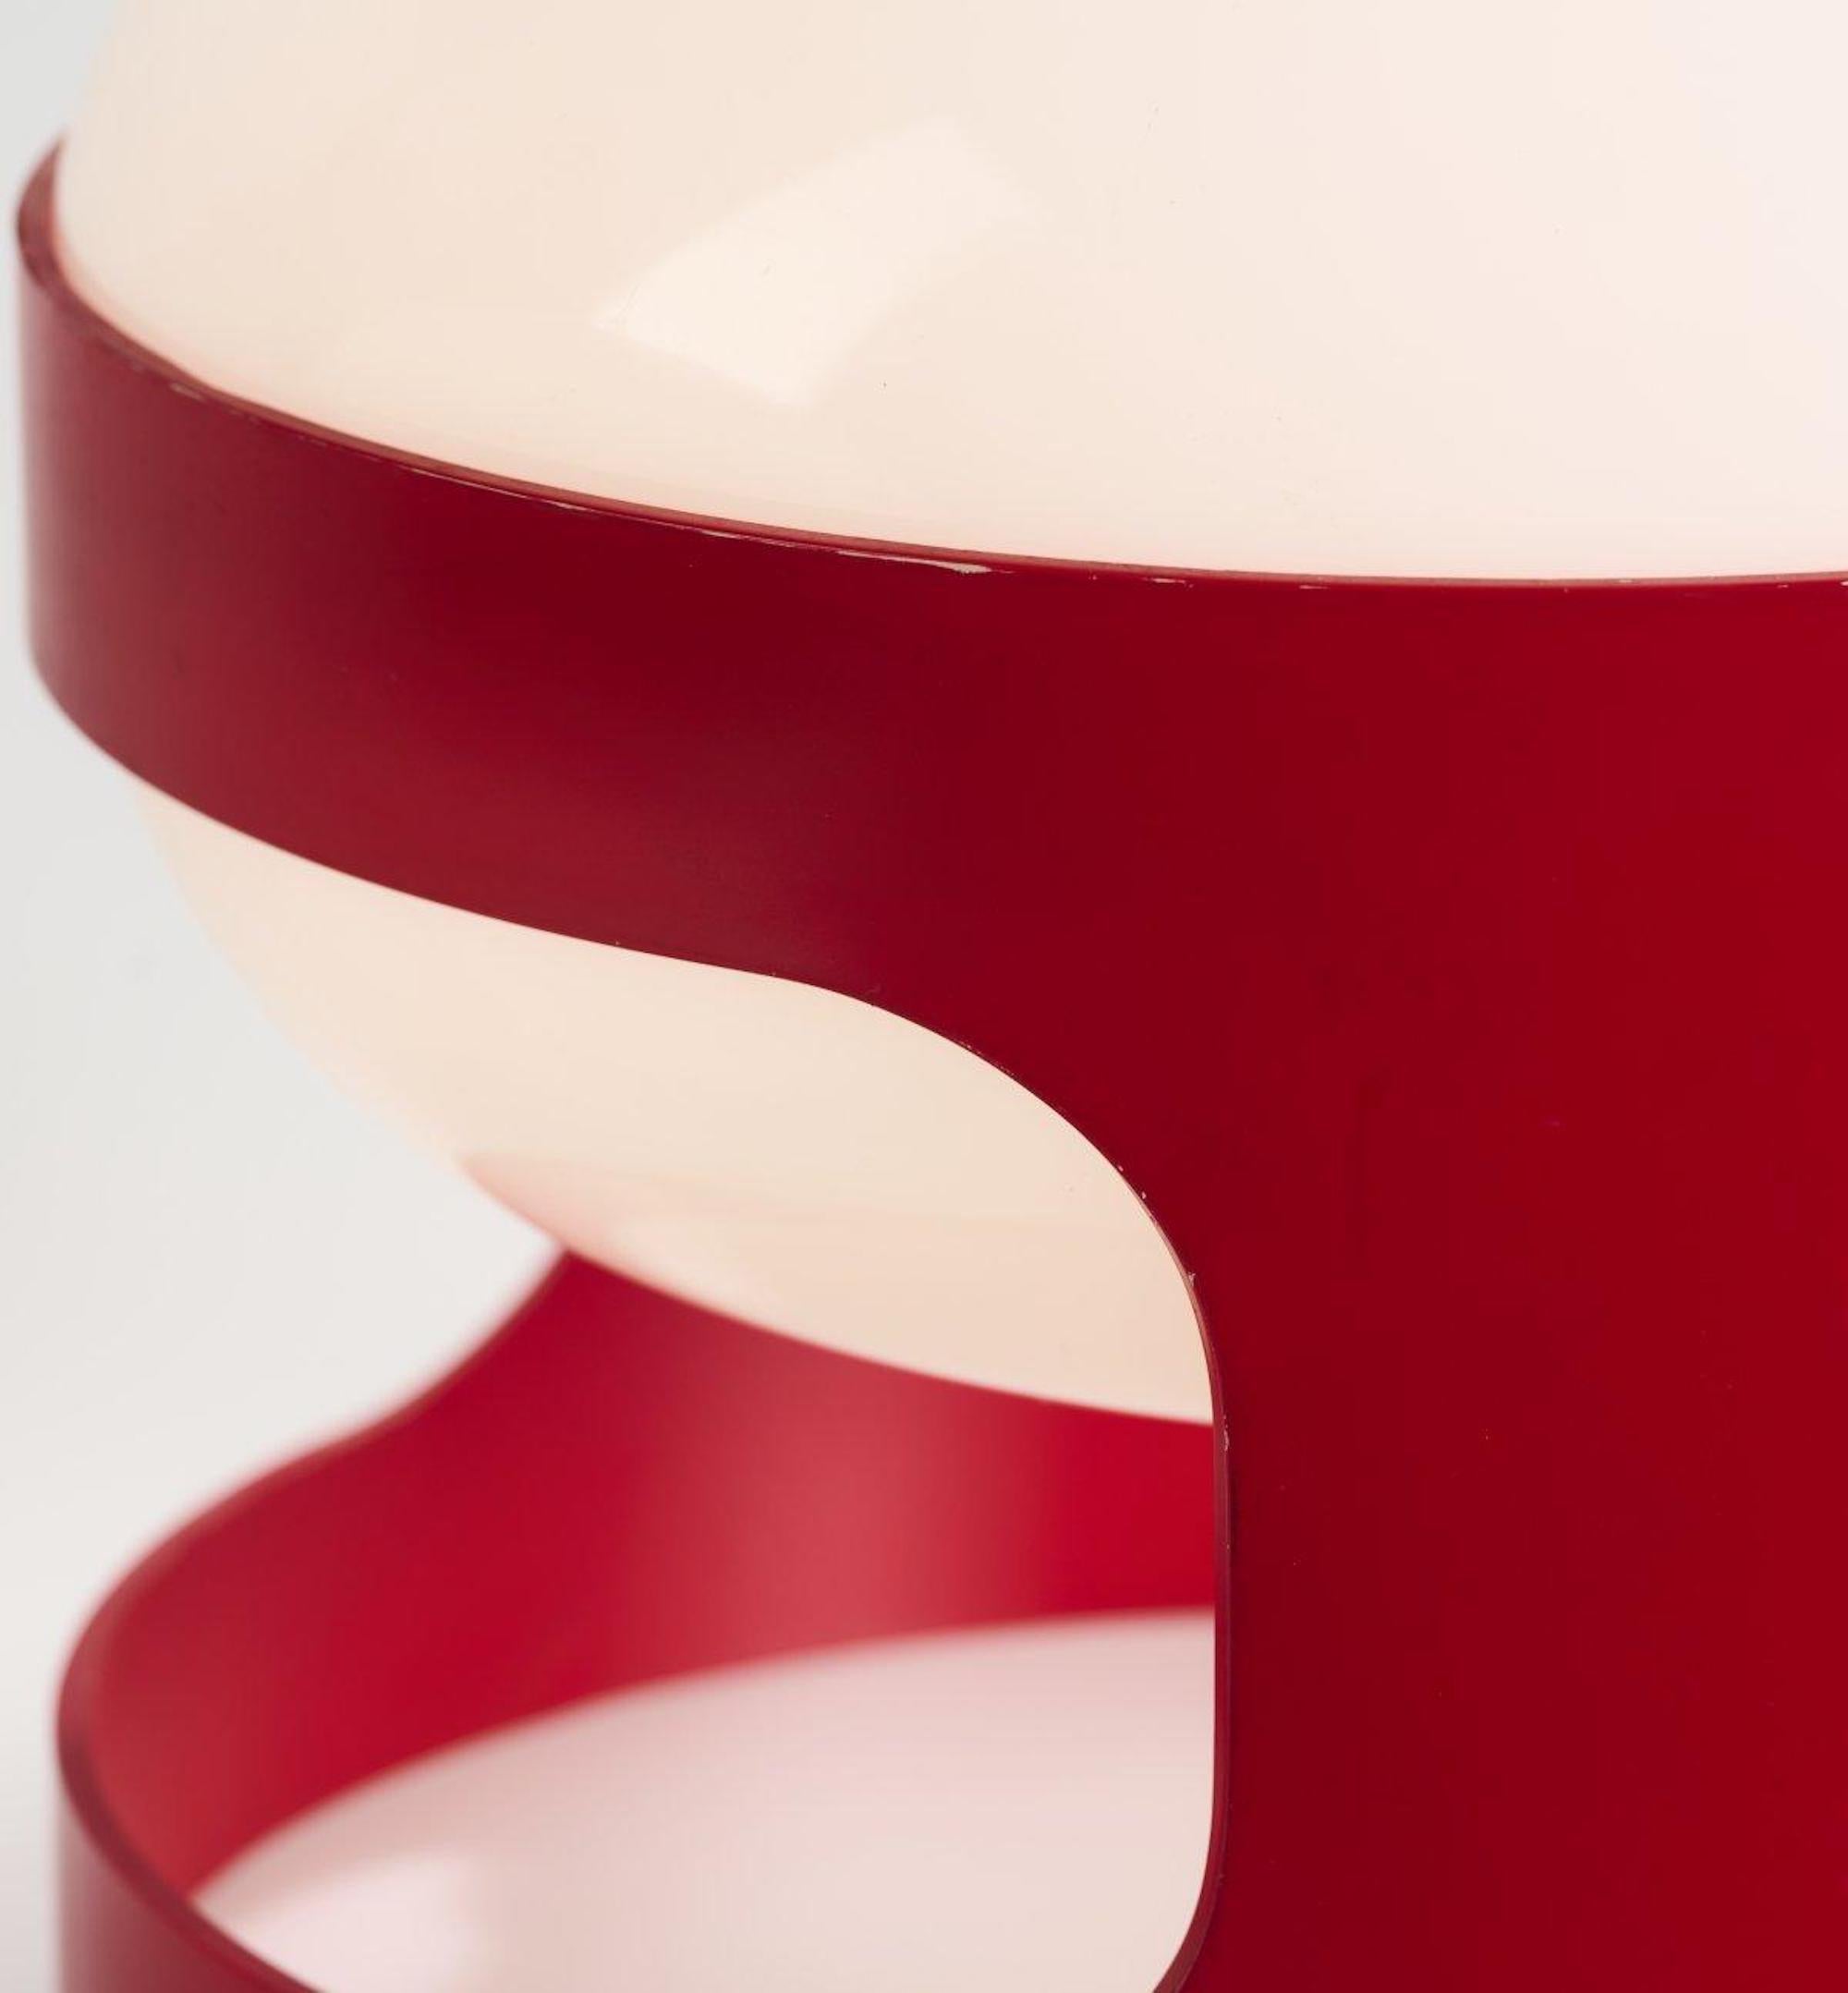 KD 27 table Lamp was designed by Joe Colombo, 1967.

Made by Kartell.

H. 23 cm, Ø 25 cm.

Noviglio. Plastic, white and red.

Ref. Gramigna, Repertorio 1950 - 1980, Milan 2001, p. 262.

Good condition.